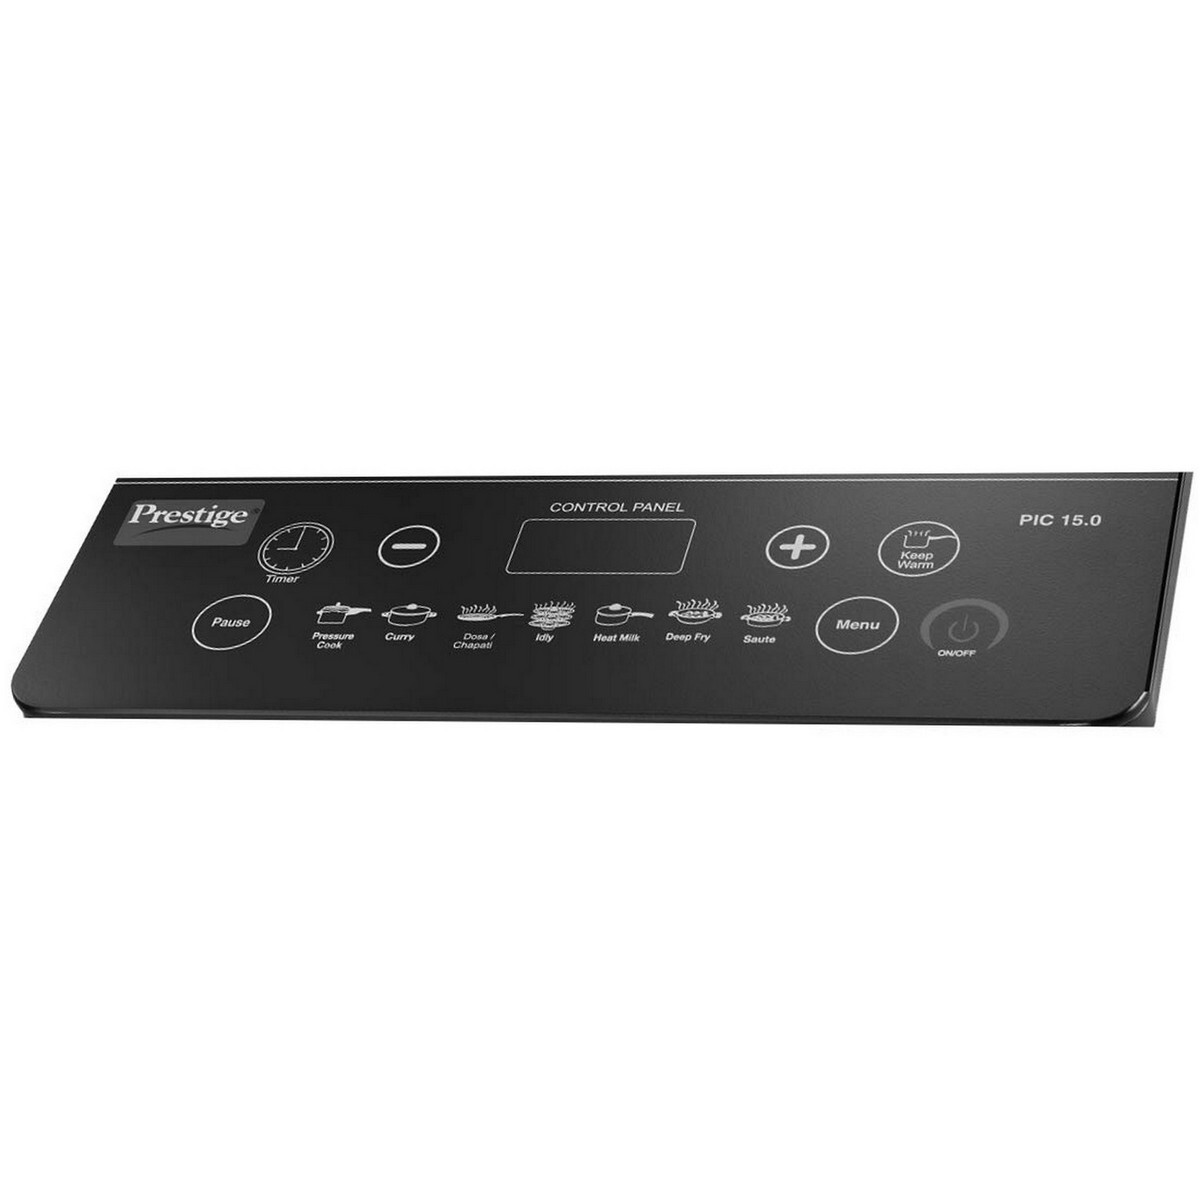 Prestige Induction Cooktop PIC15 1600 Watts